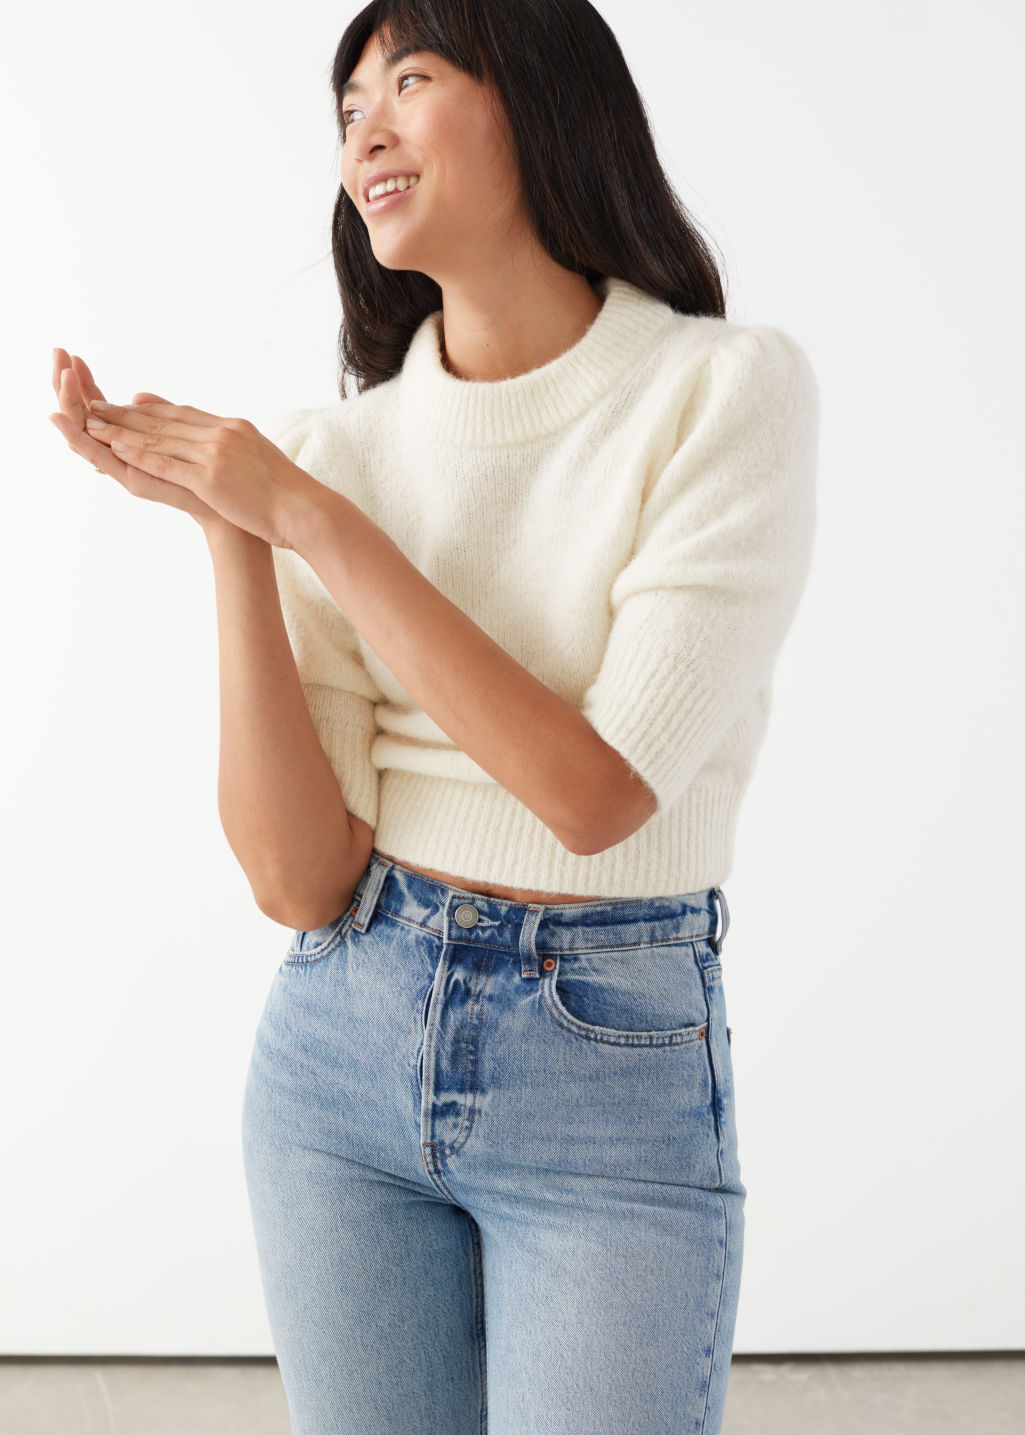 Alpaca Wool Blend Puff Sleeve Jumper - White - Sweaters - & Other Stories